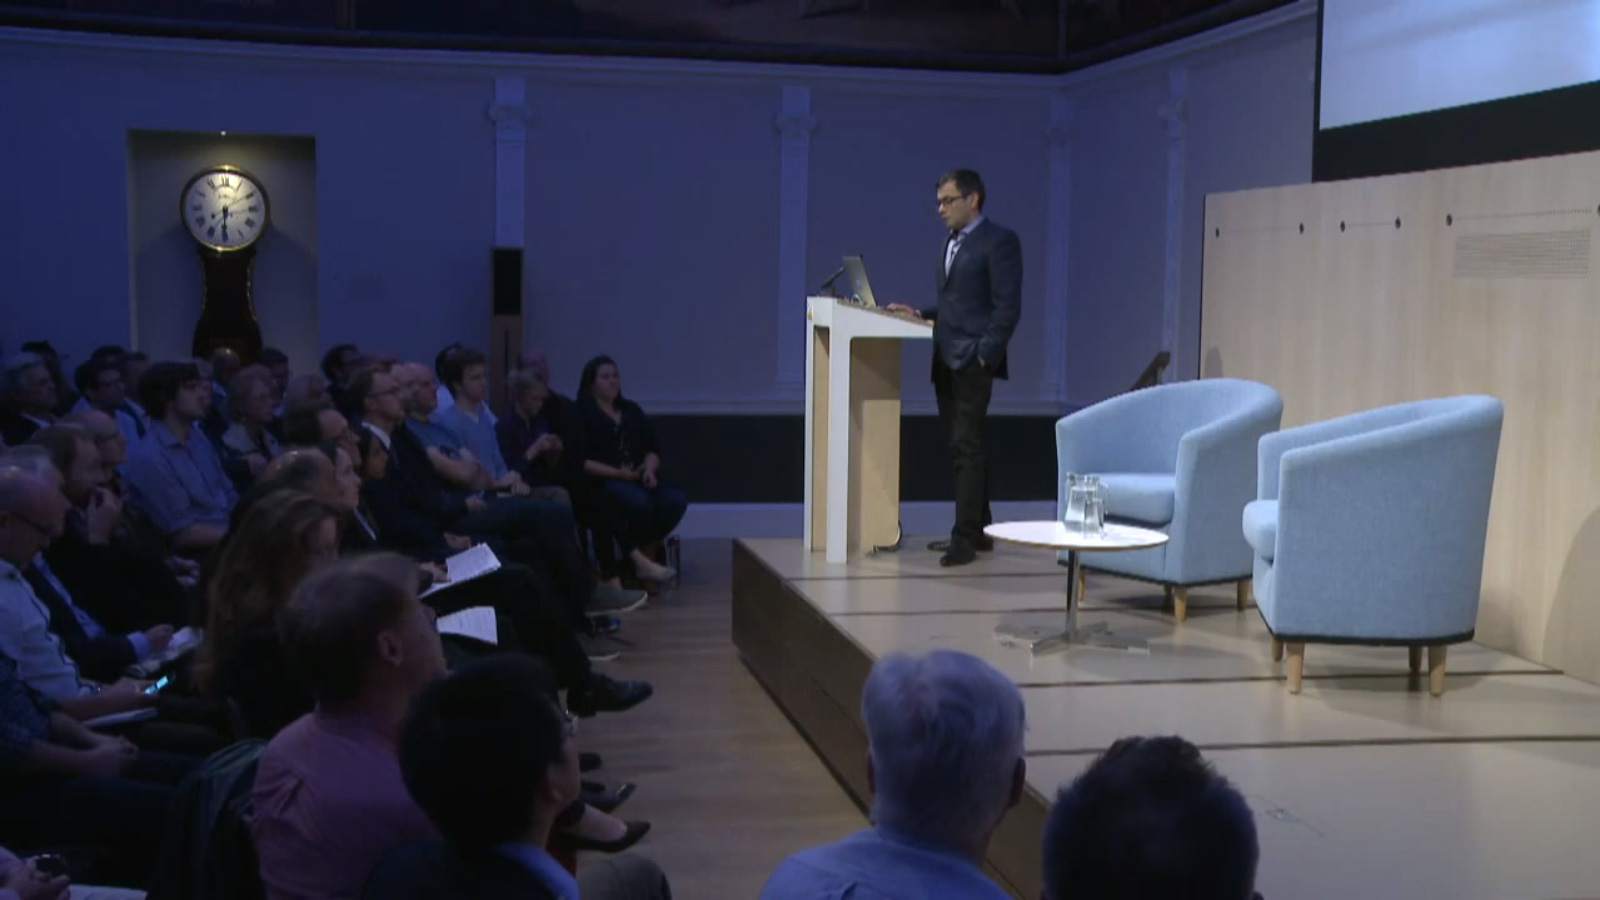 Demis Hassabis presents Artificial Intelligence and the Future at the Royal Society of Arts in London